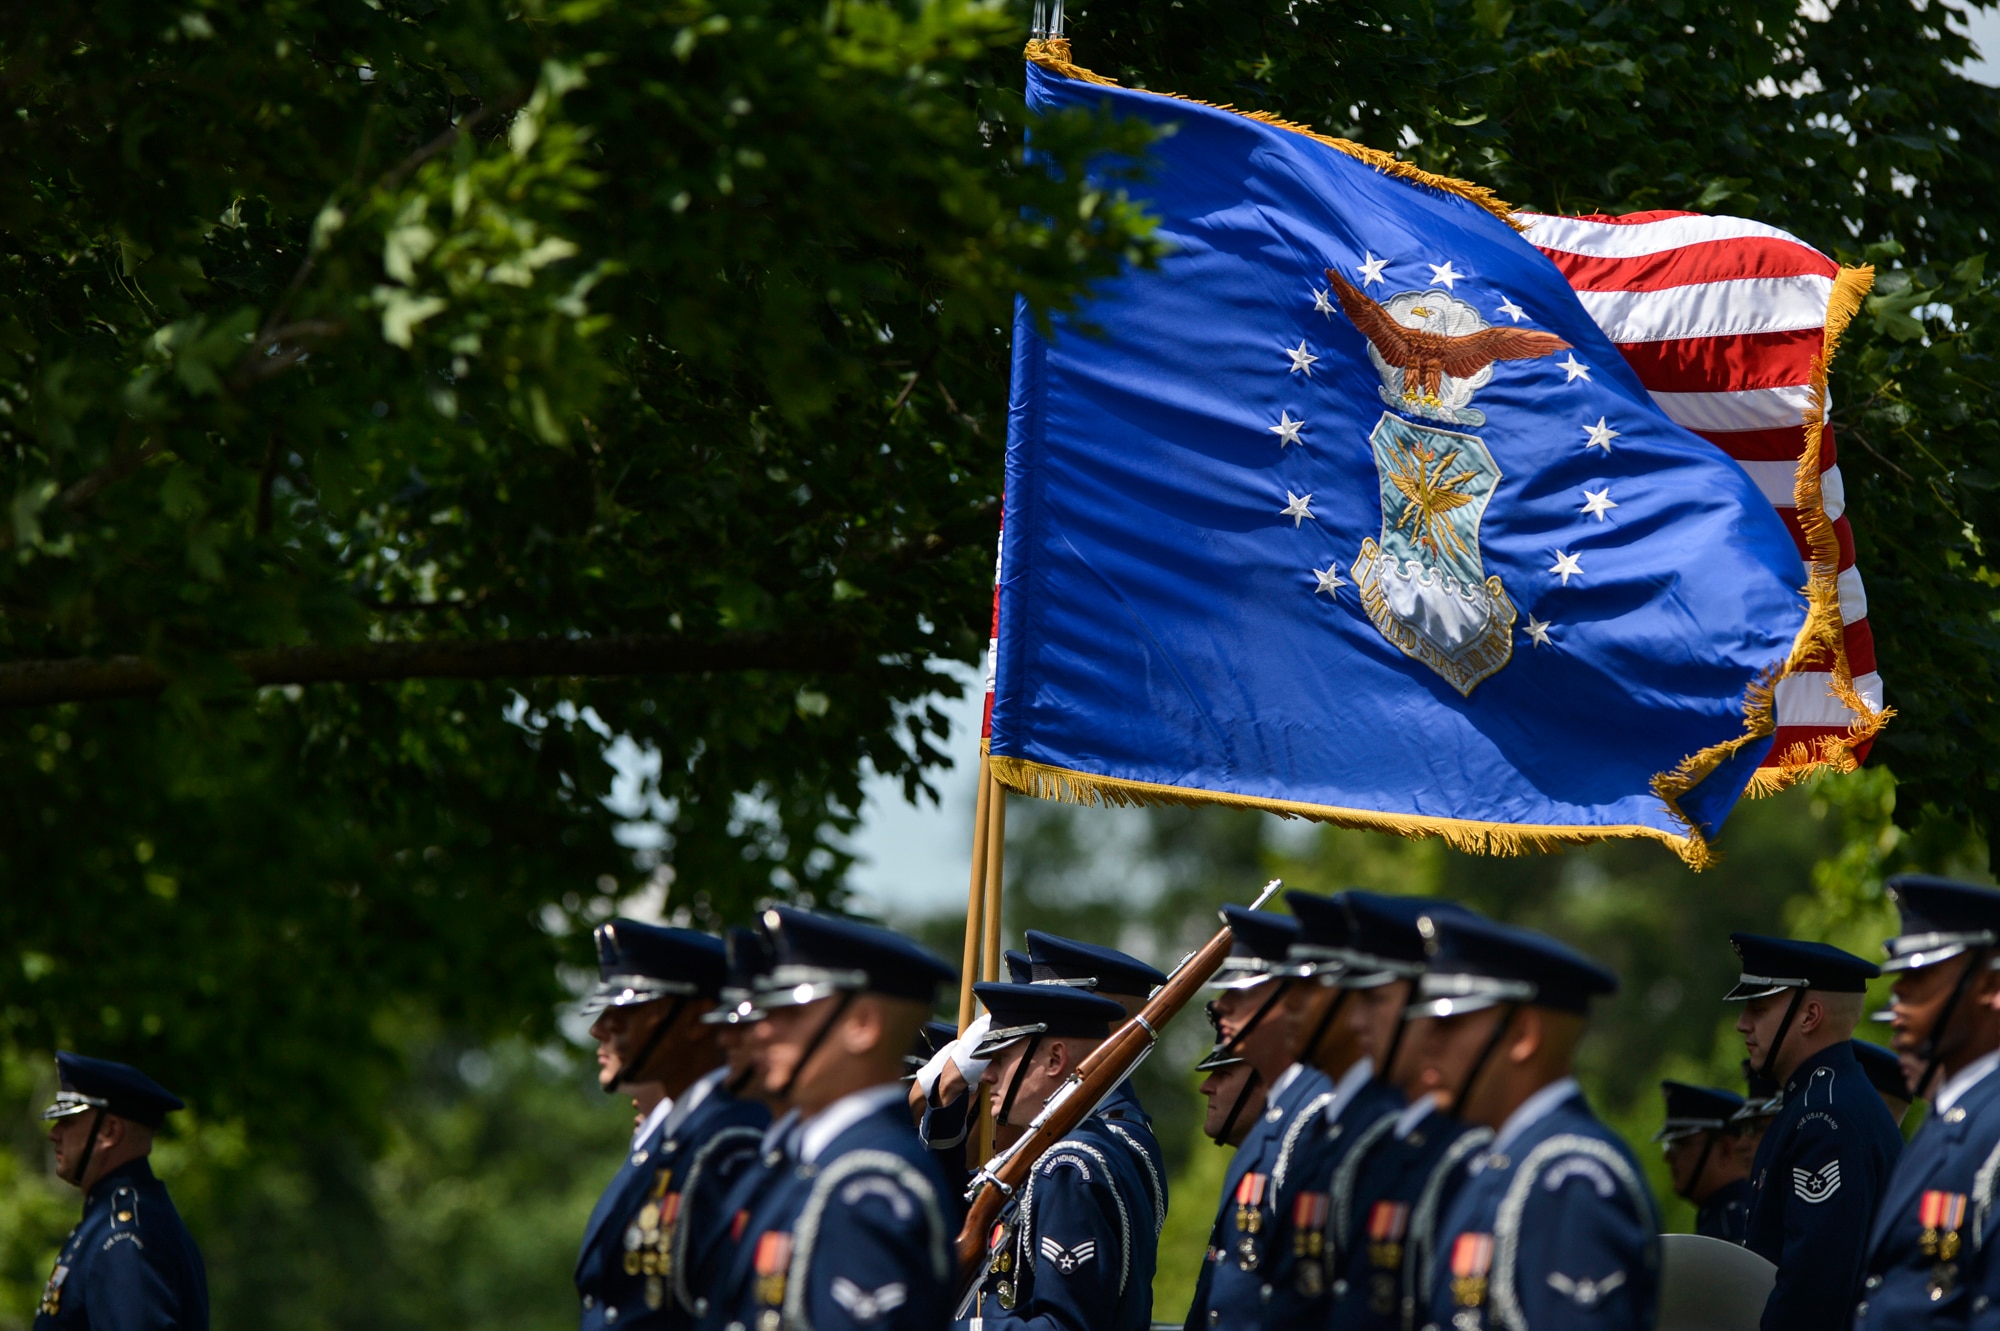 Members of the U. S. Air Force Honor Guard stand at attention during the graveside ceremony for 2nd Lt. Malvin G. Whitfield, Army Air Forces and Air Force veteran, at Arlington National Cemetery, June 8, 2016. Whitfield joined the Army Air Forces in 1943 as a Tuskegee Airman, one of the more than 1,000 African-American pilots who fought in World War II. He died Nov. 19, 2015, at the age of 91. (U.S. Air Force Photo by Tech. Sgt. Joshua L. DeMotts/Released)